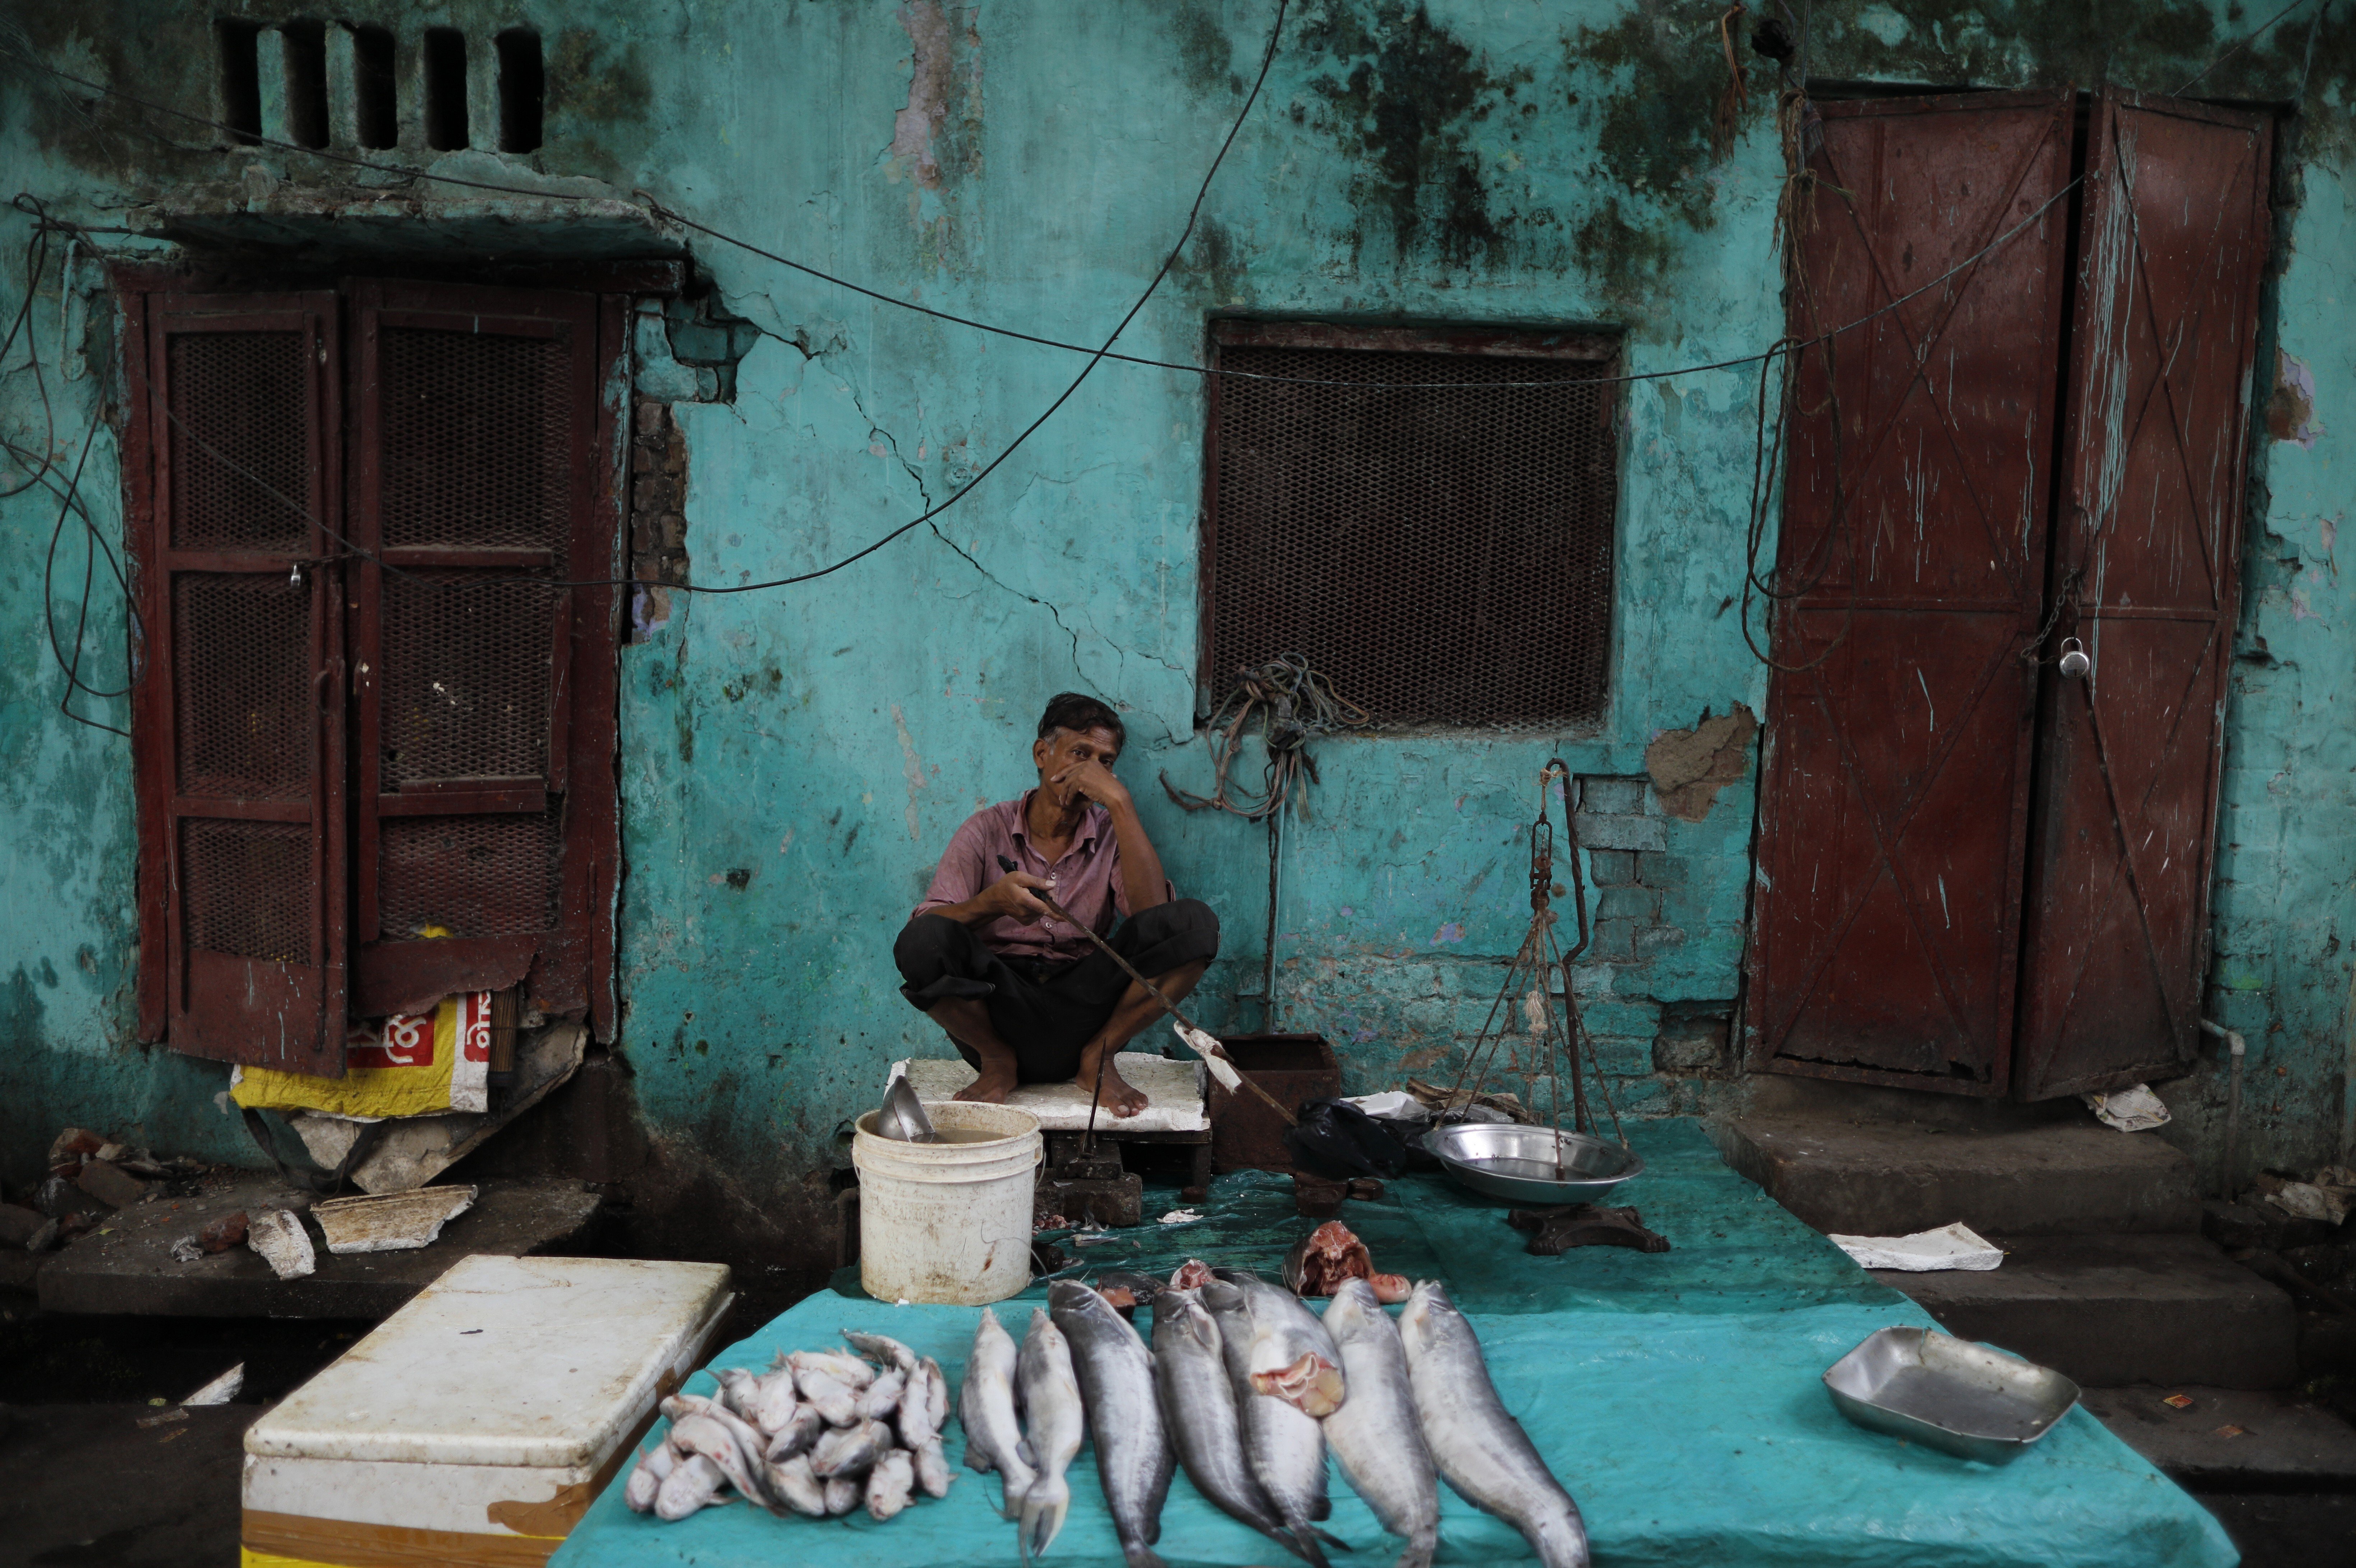 A fish vendor sits at his roadside stall in Lucknow, India, on September 12. Job creation will be an enormous challenge as India struggles to find normalcy again. Photo: AP